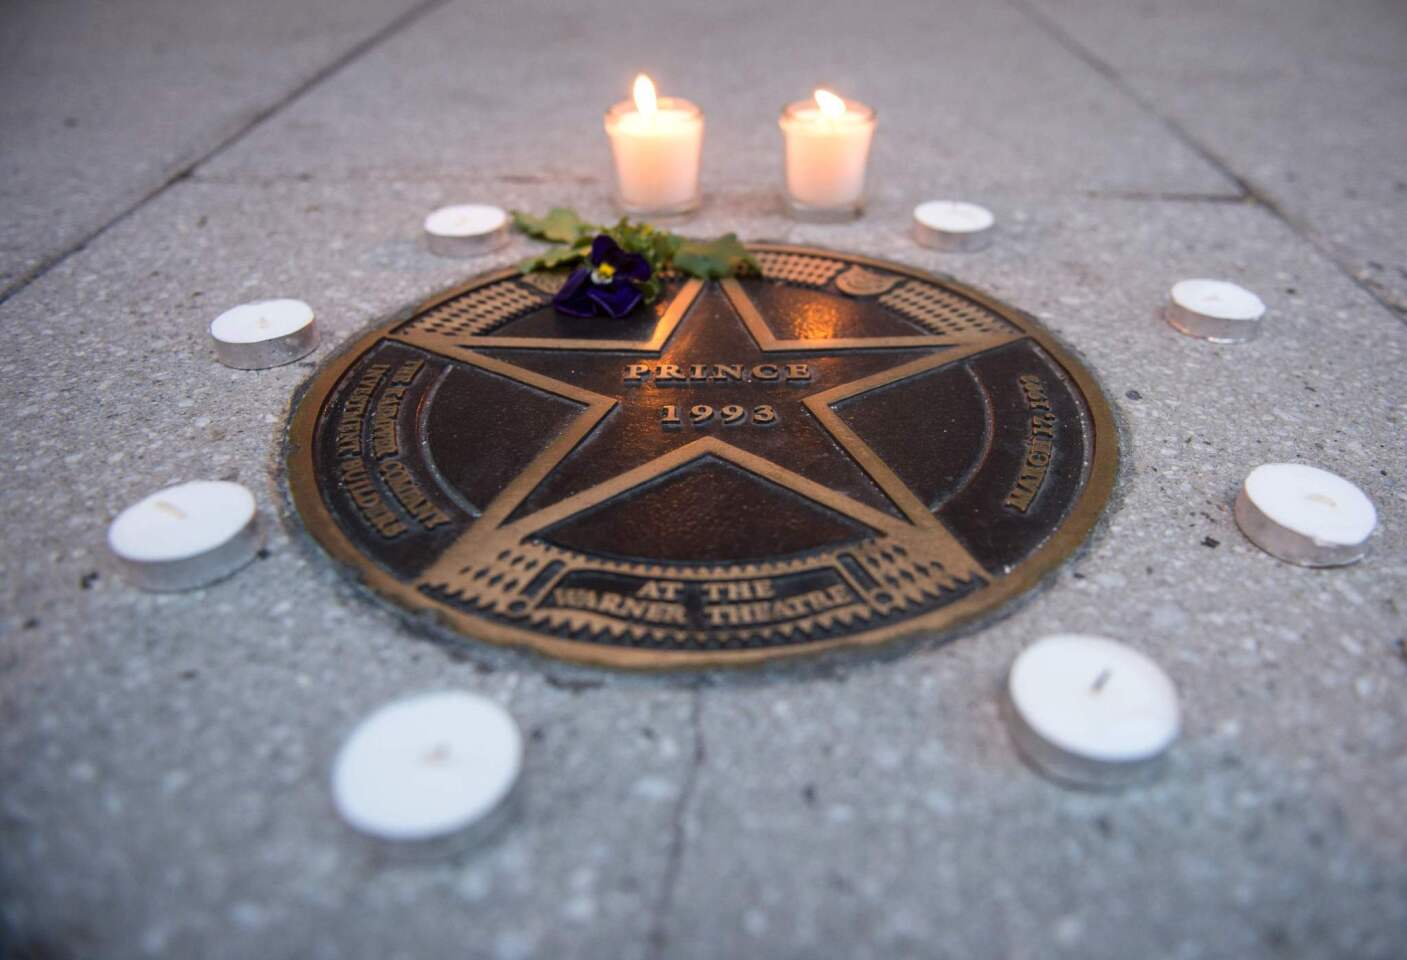 Prince's star outside the Warner Theatre in the nation's capital.